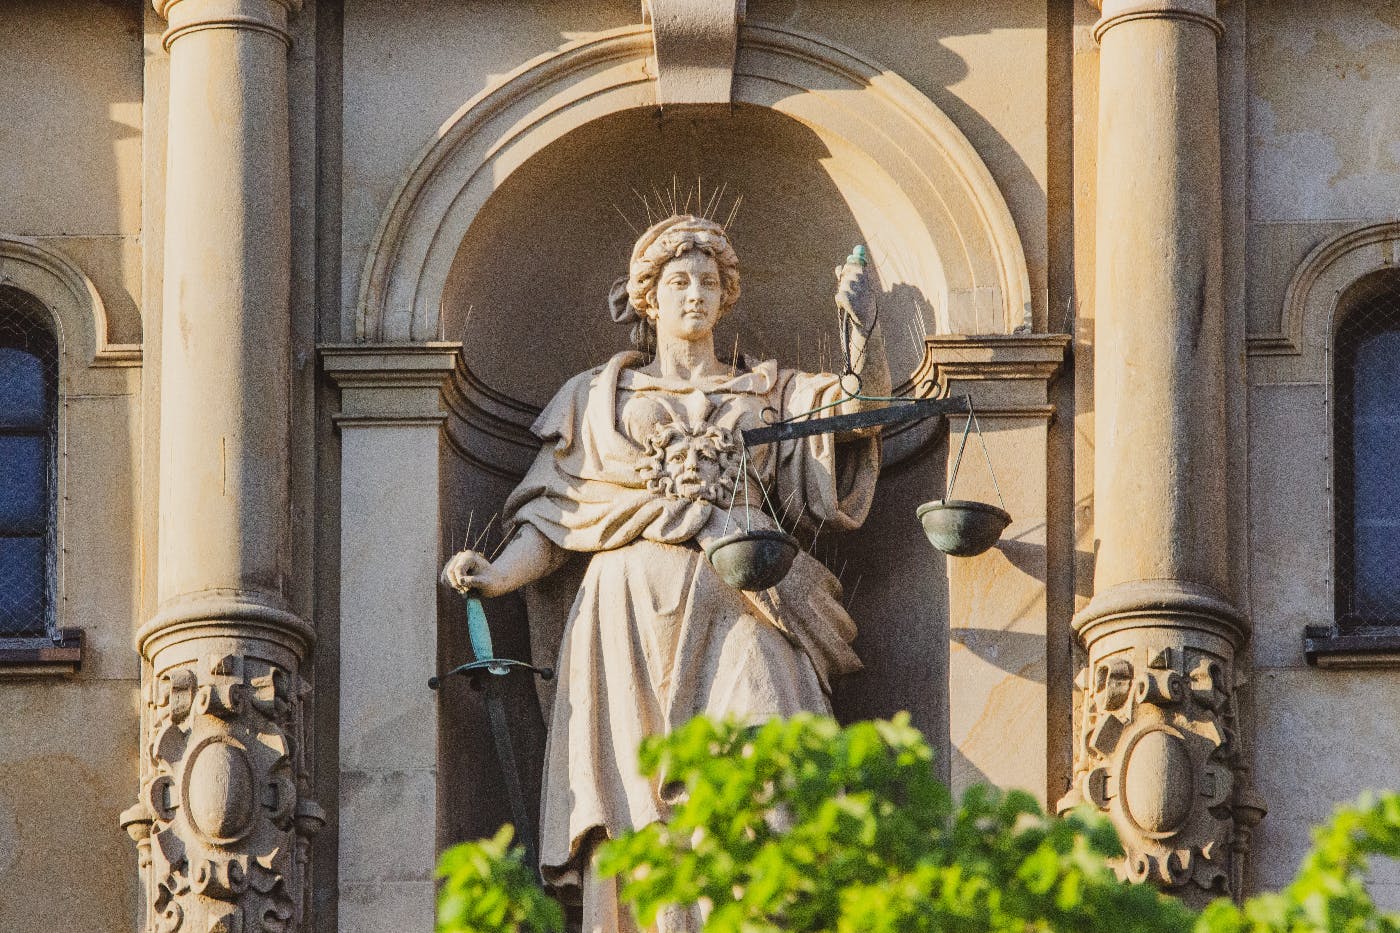 A statue of Lady Justice in a pillar framed alcove